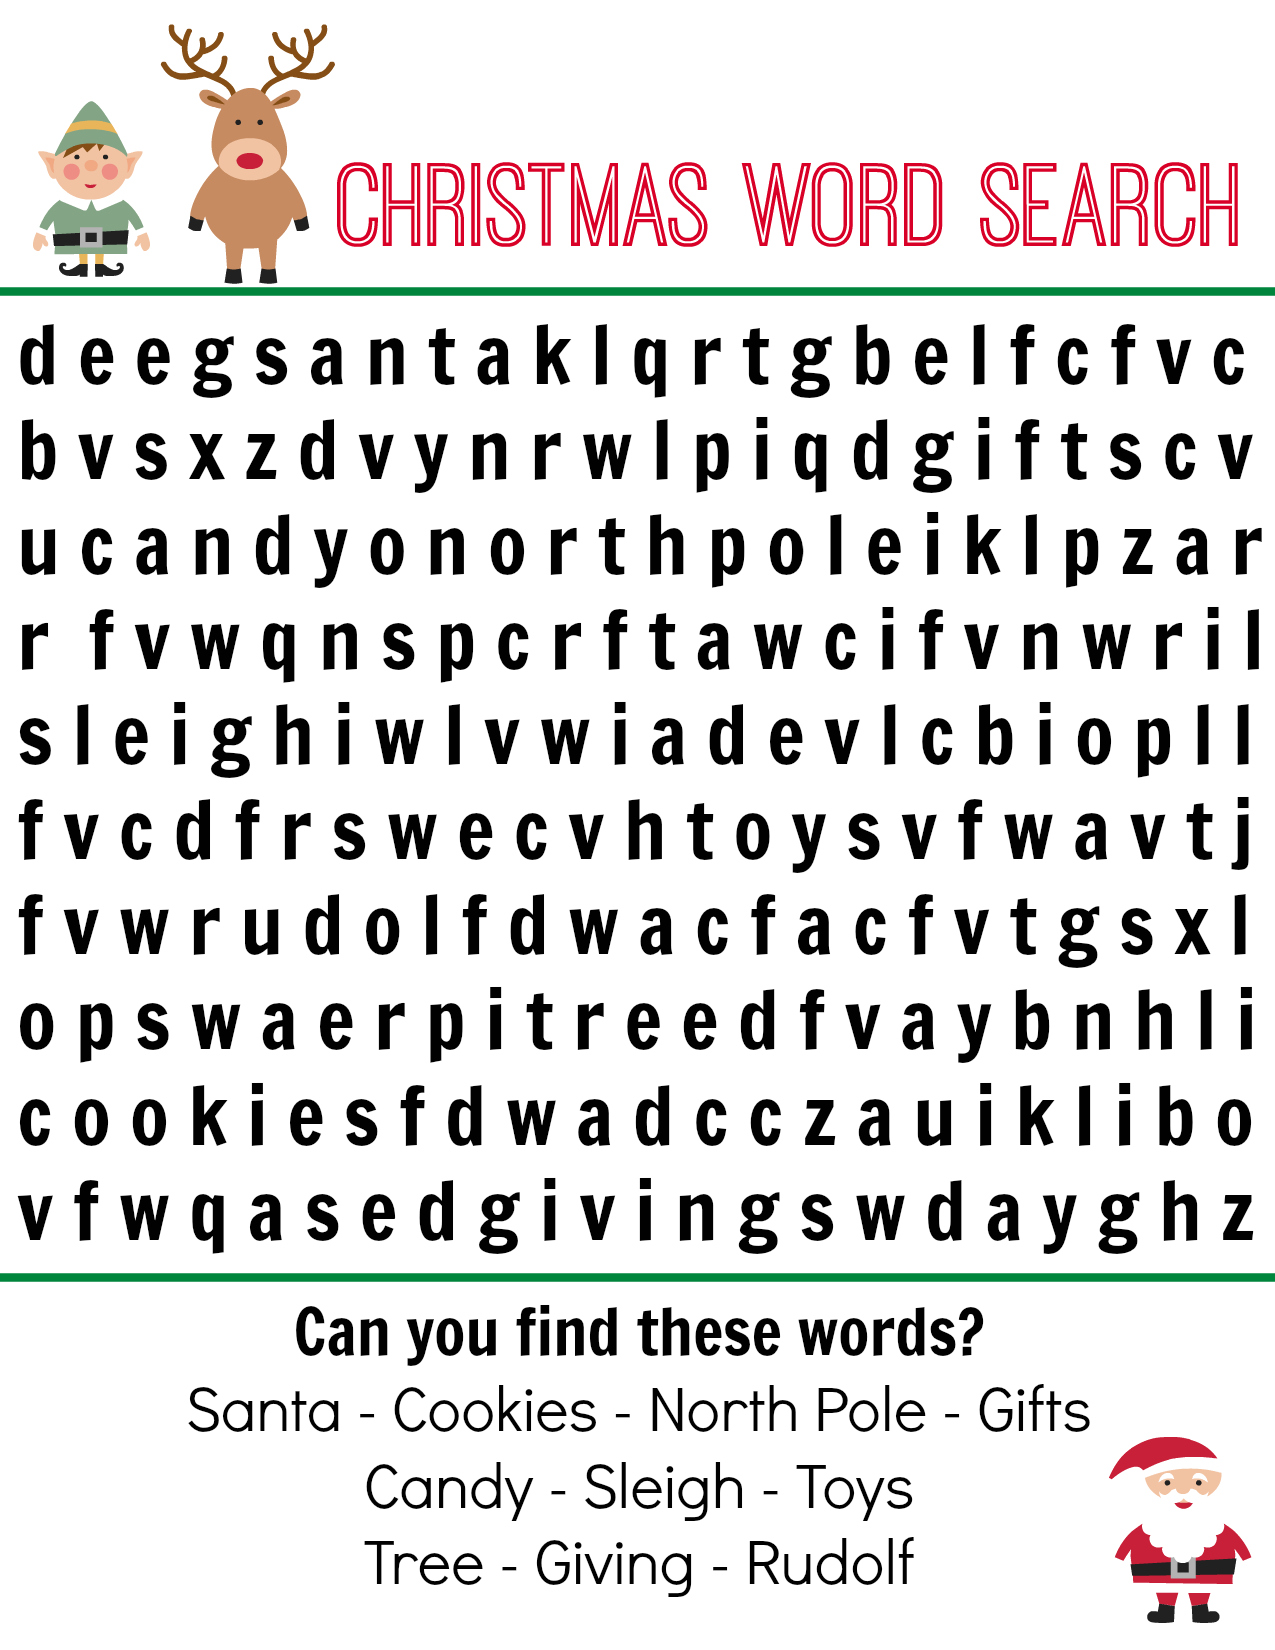 Christmas Word Search Free Printable - No Time For Flash Cards